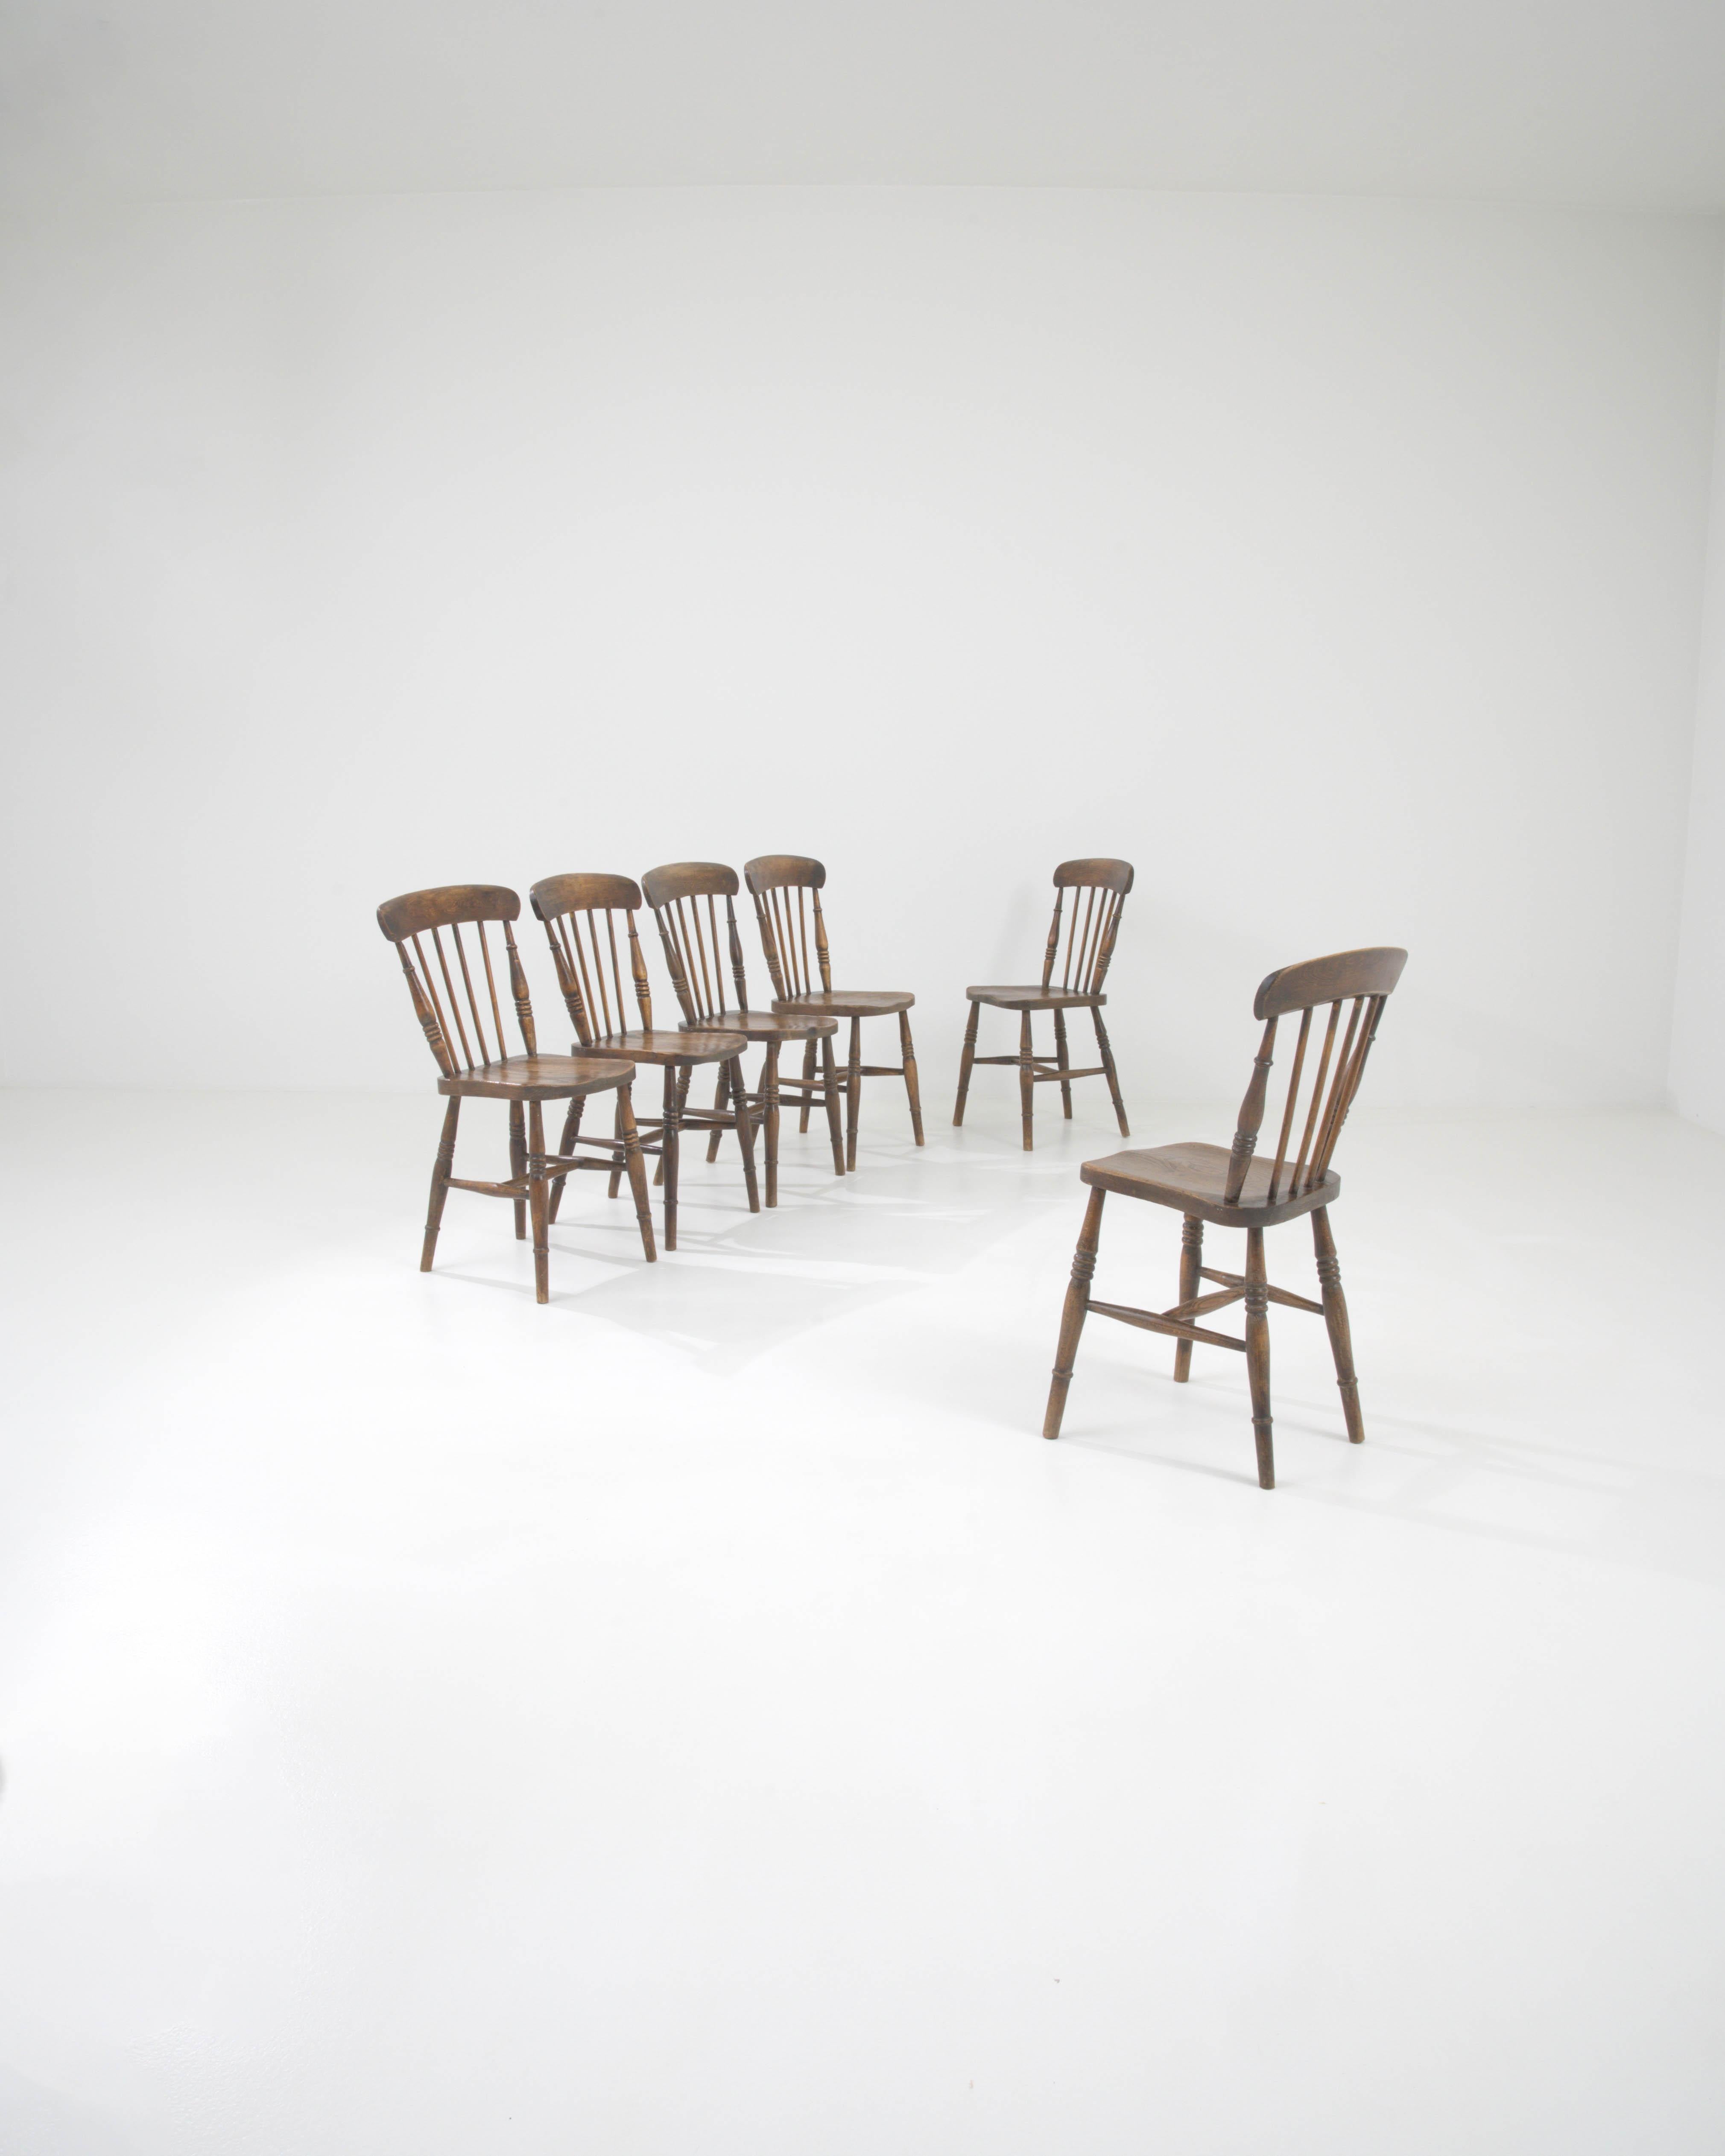 This exquisite set of wooden dining chairs from the early 20th century is steeped in the traditions of classic craftsmanship. Each chair in this collection stands as a testament to timeless design, featuring a curved top rail and slender spindles